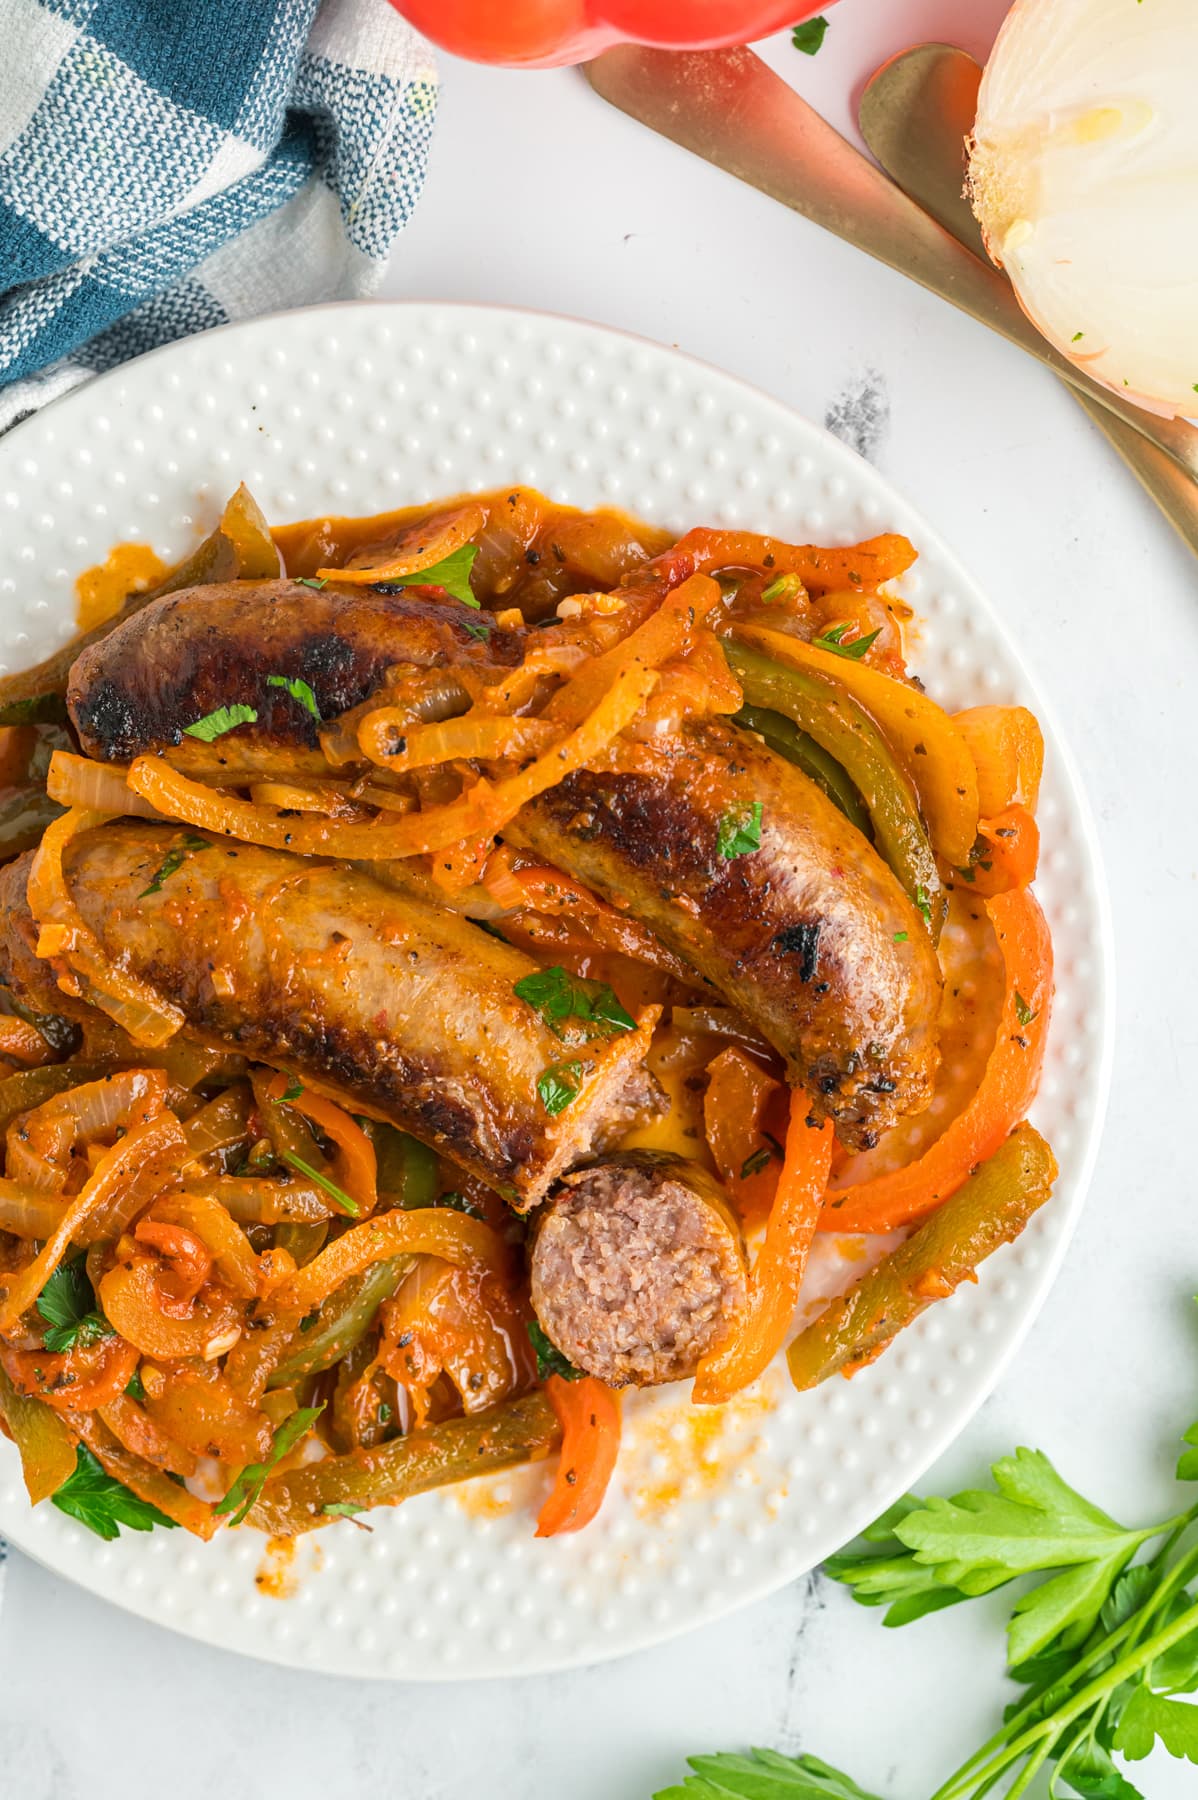 Overhead view of a plate of Italian sausage and peppers